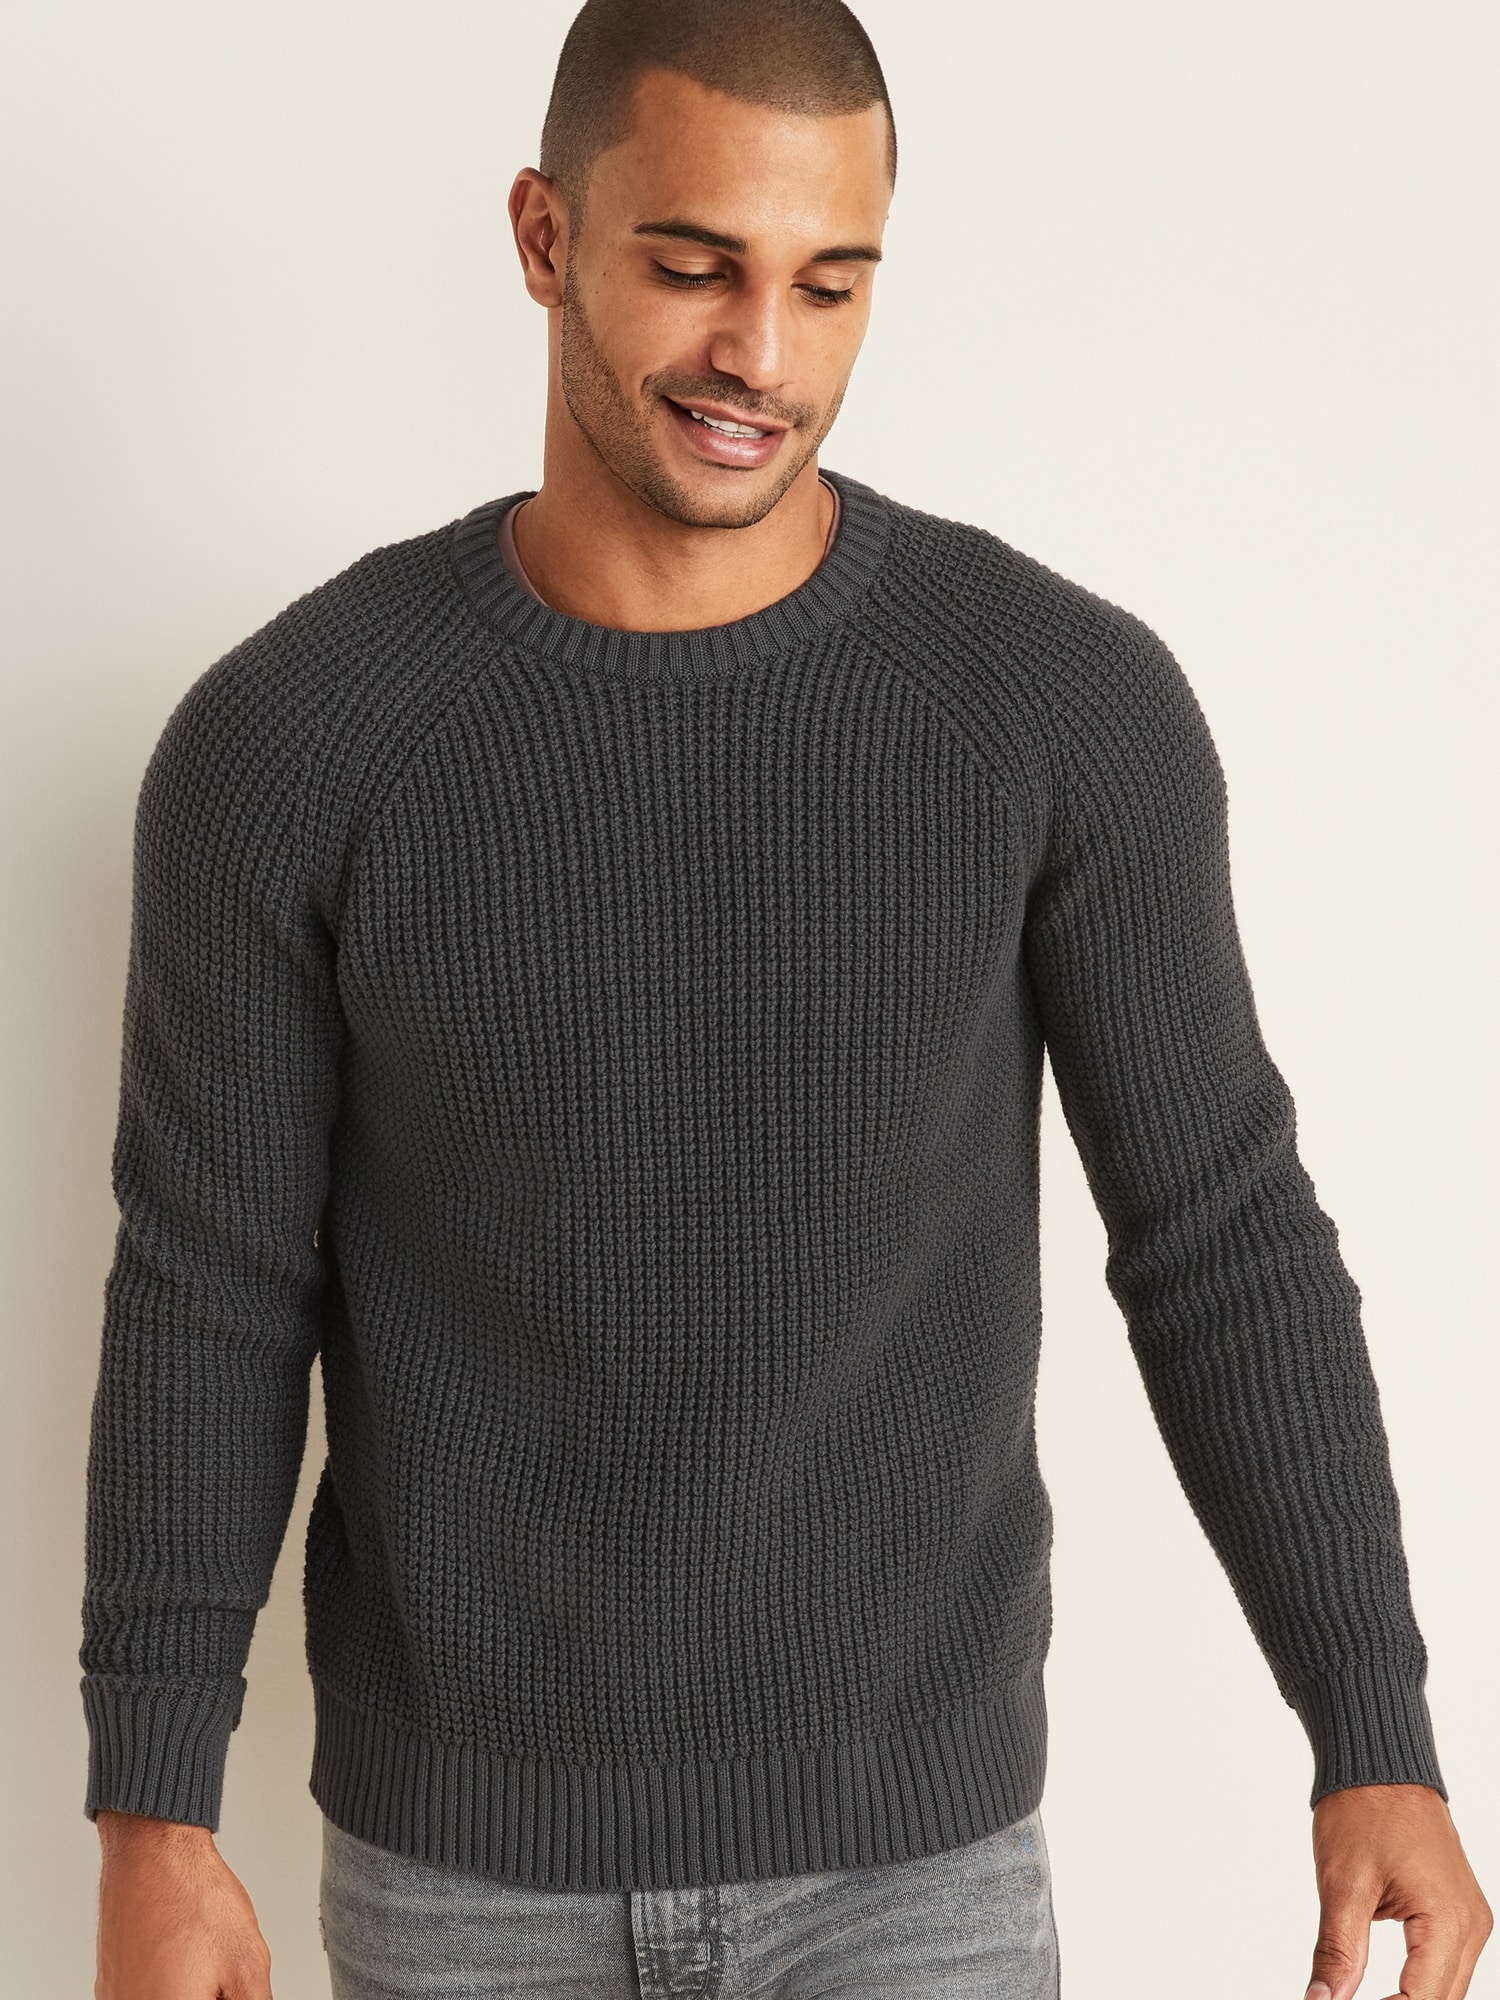 Waffle Knit Extra-Long Sweater for Tall Men